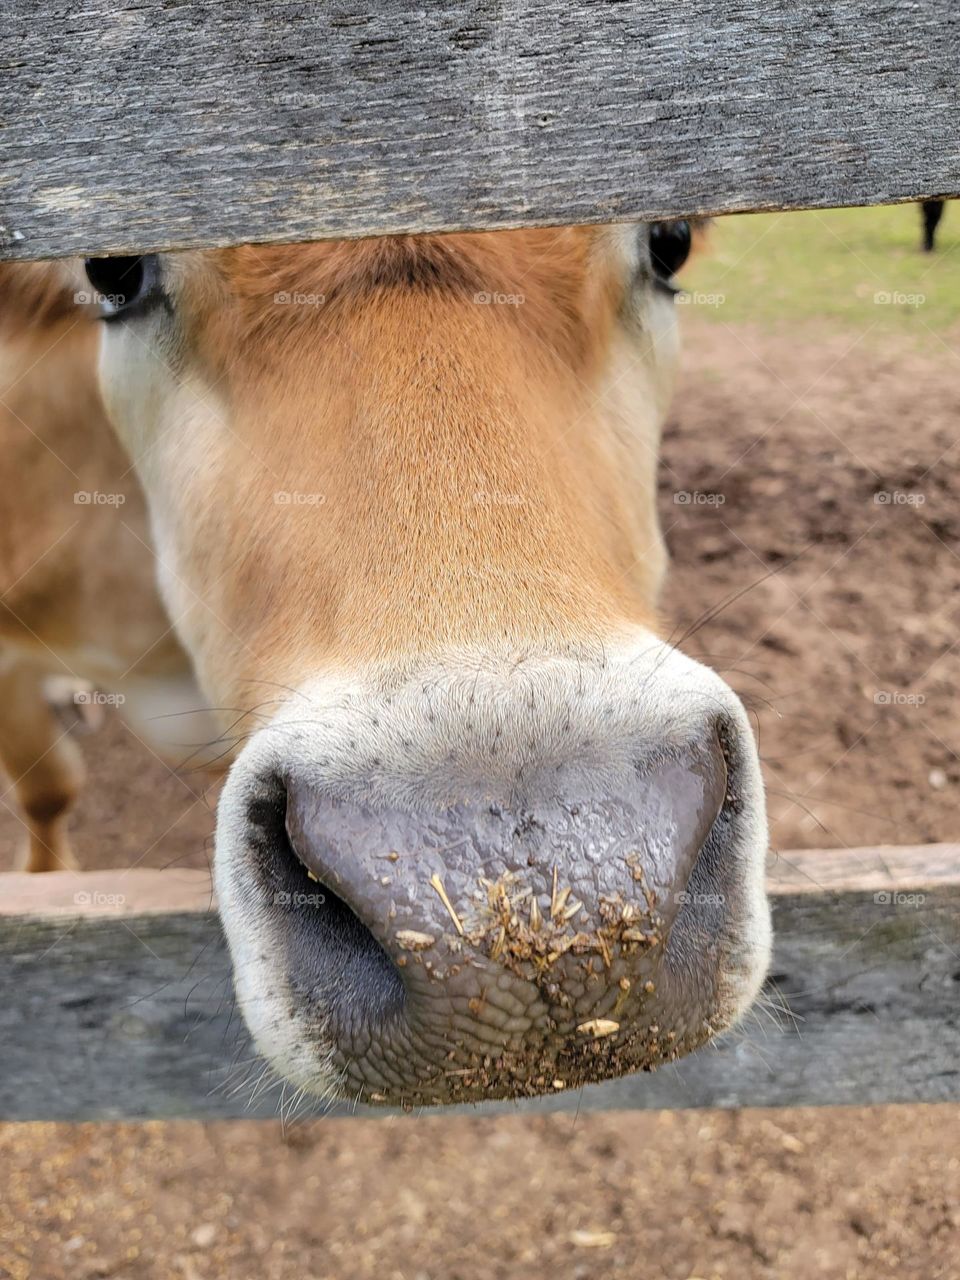 Cute cow snout poking through the wood fence on a farm.